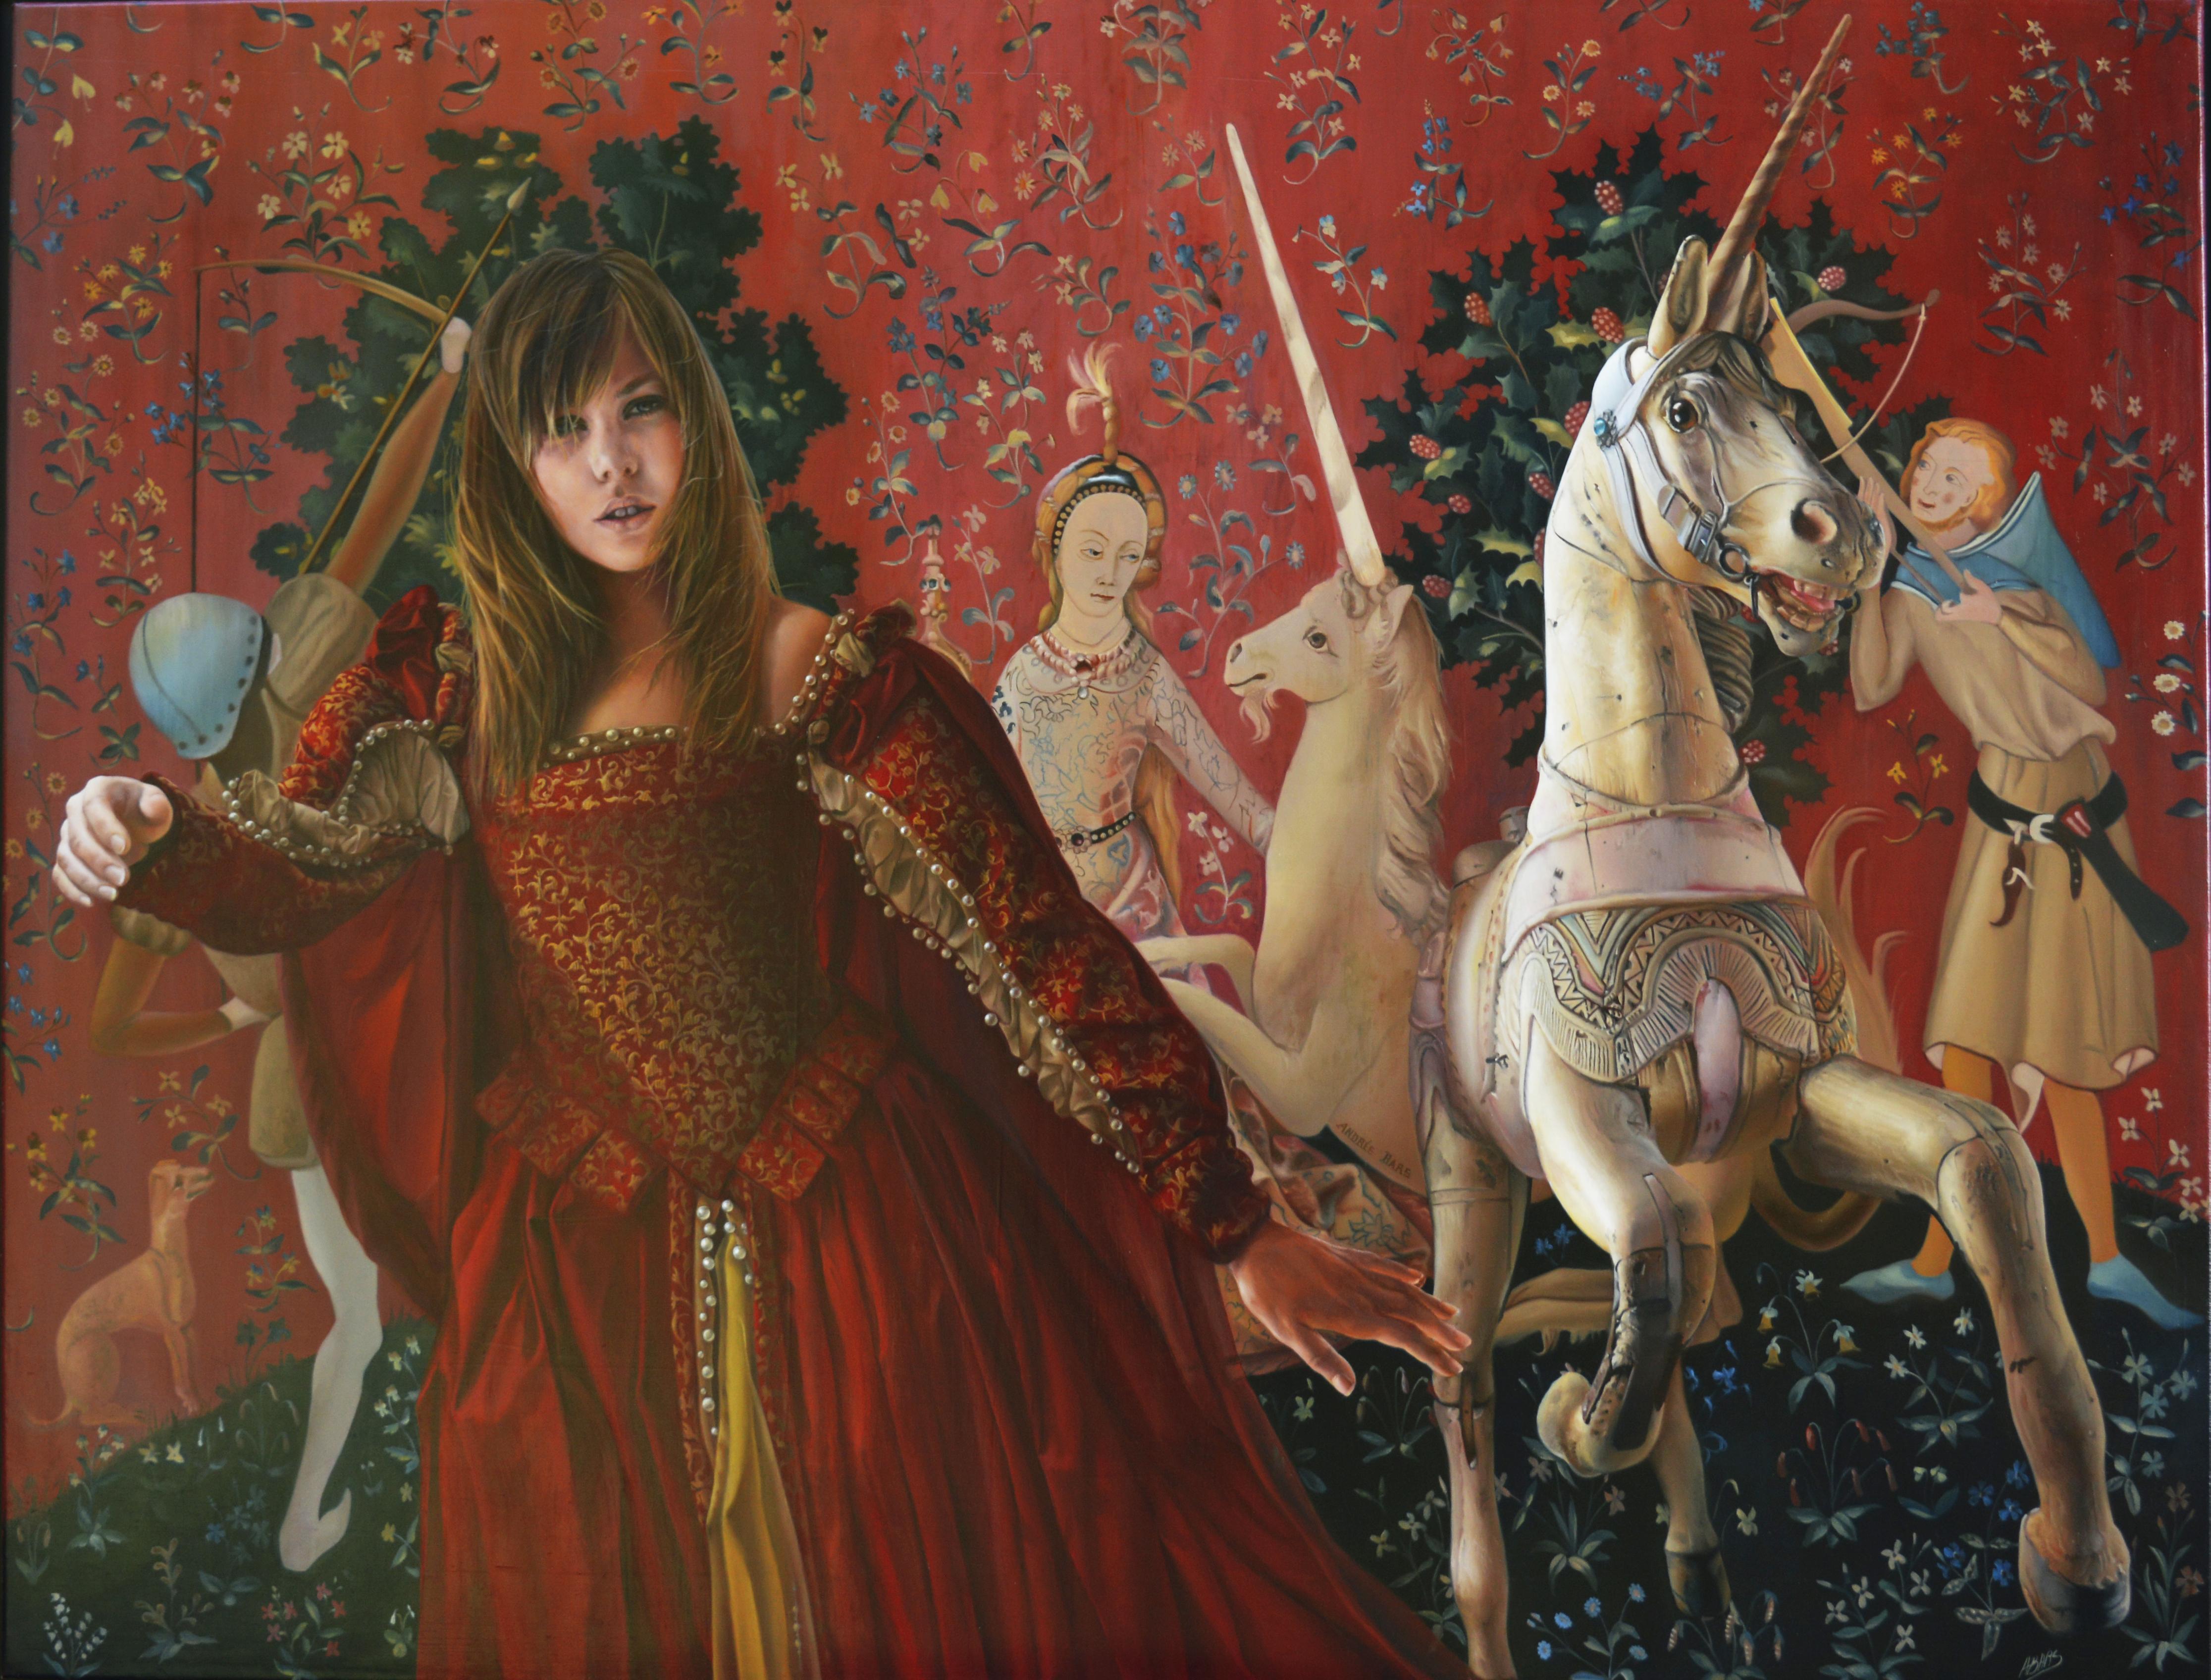 Andrée Bars Figurative Painting - The End of Innocence, Middle Ages Princess with Unicorn Realist Red Oil Painting